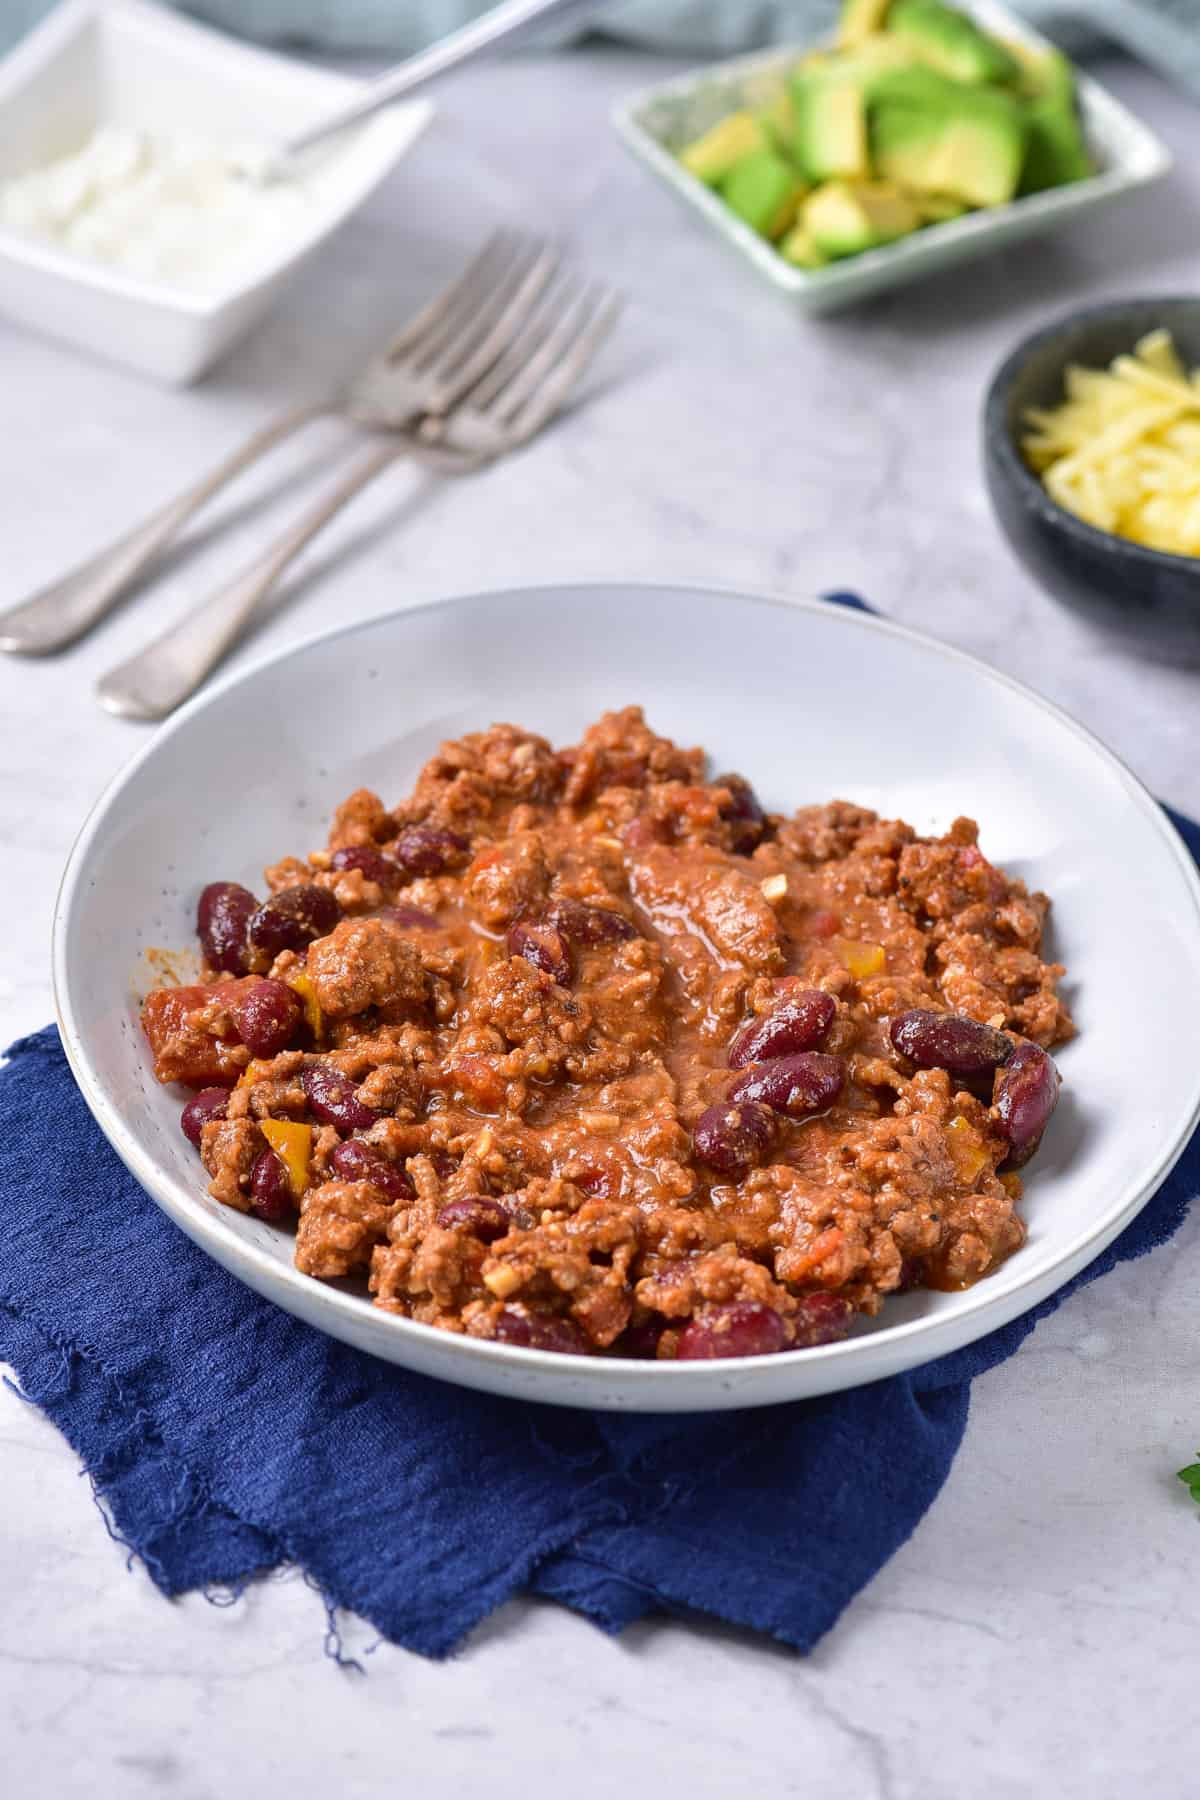 Dish of beef and bean chilli.